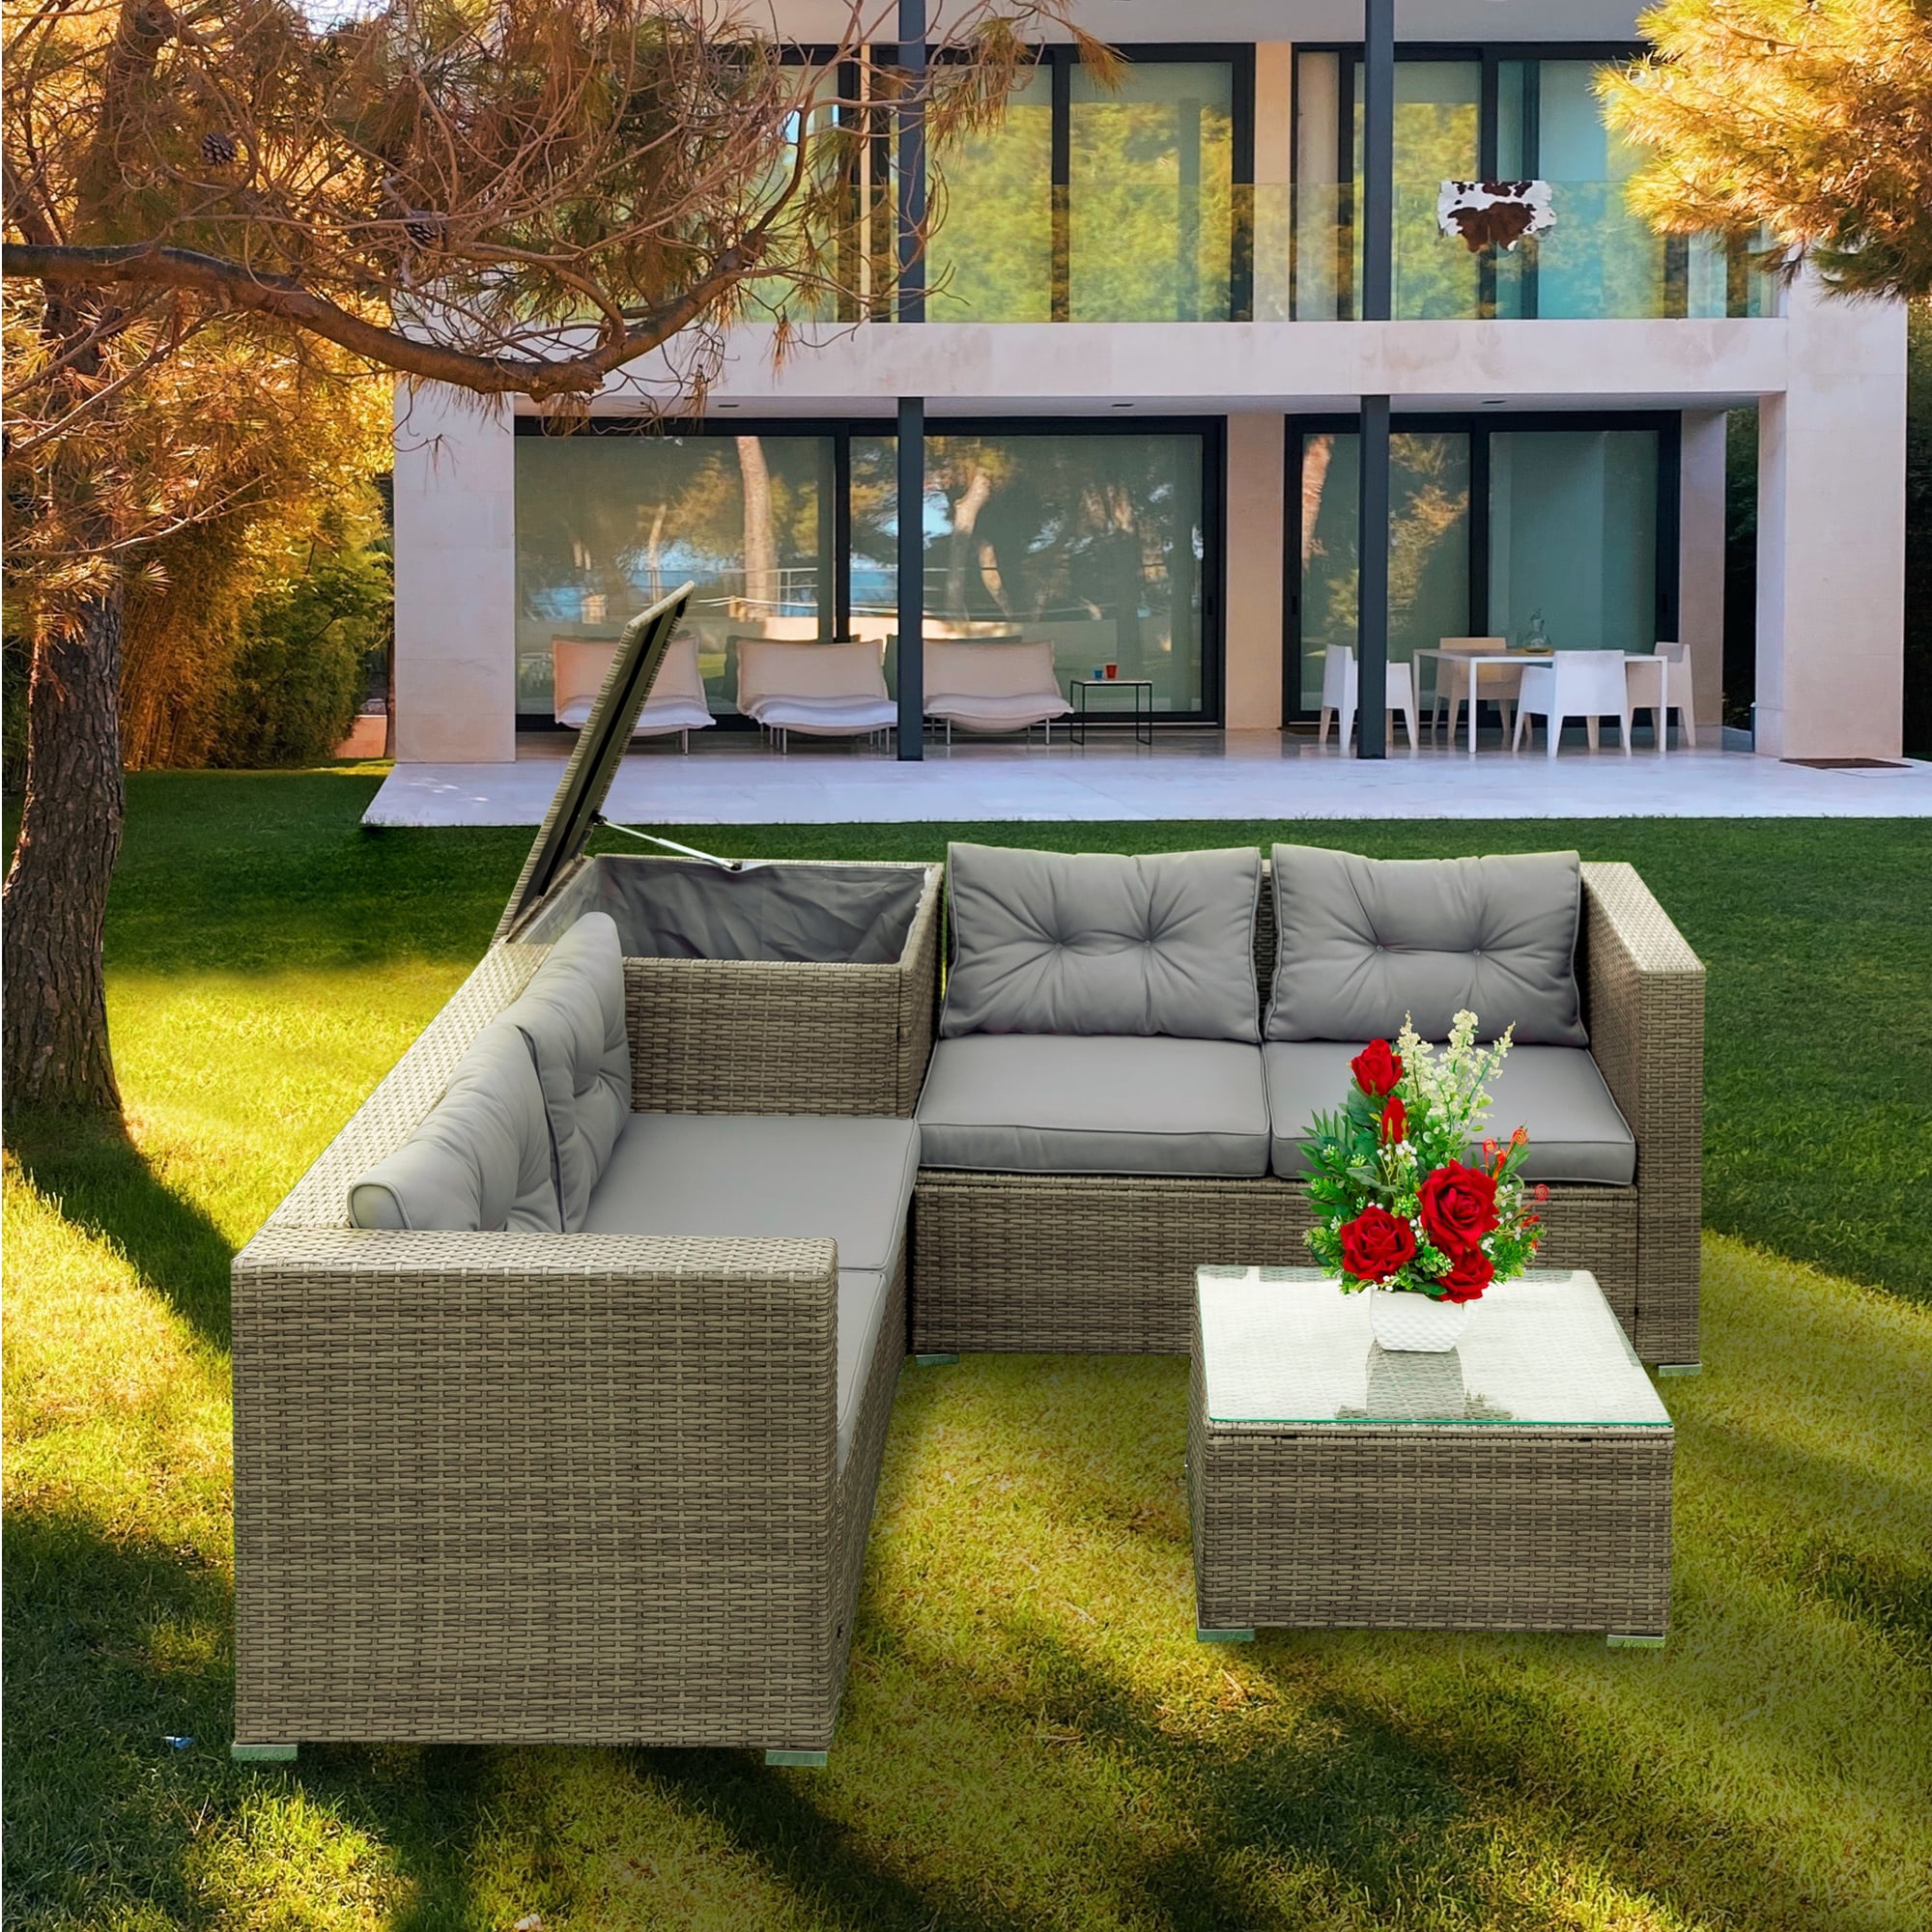 4 Pieces Outdoor Patio Sectional Sofa Set, All Weather PE Wicker Rattan